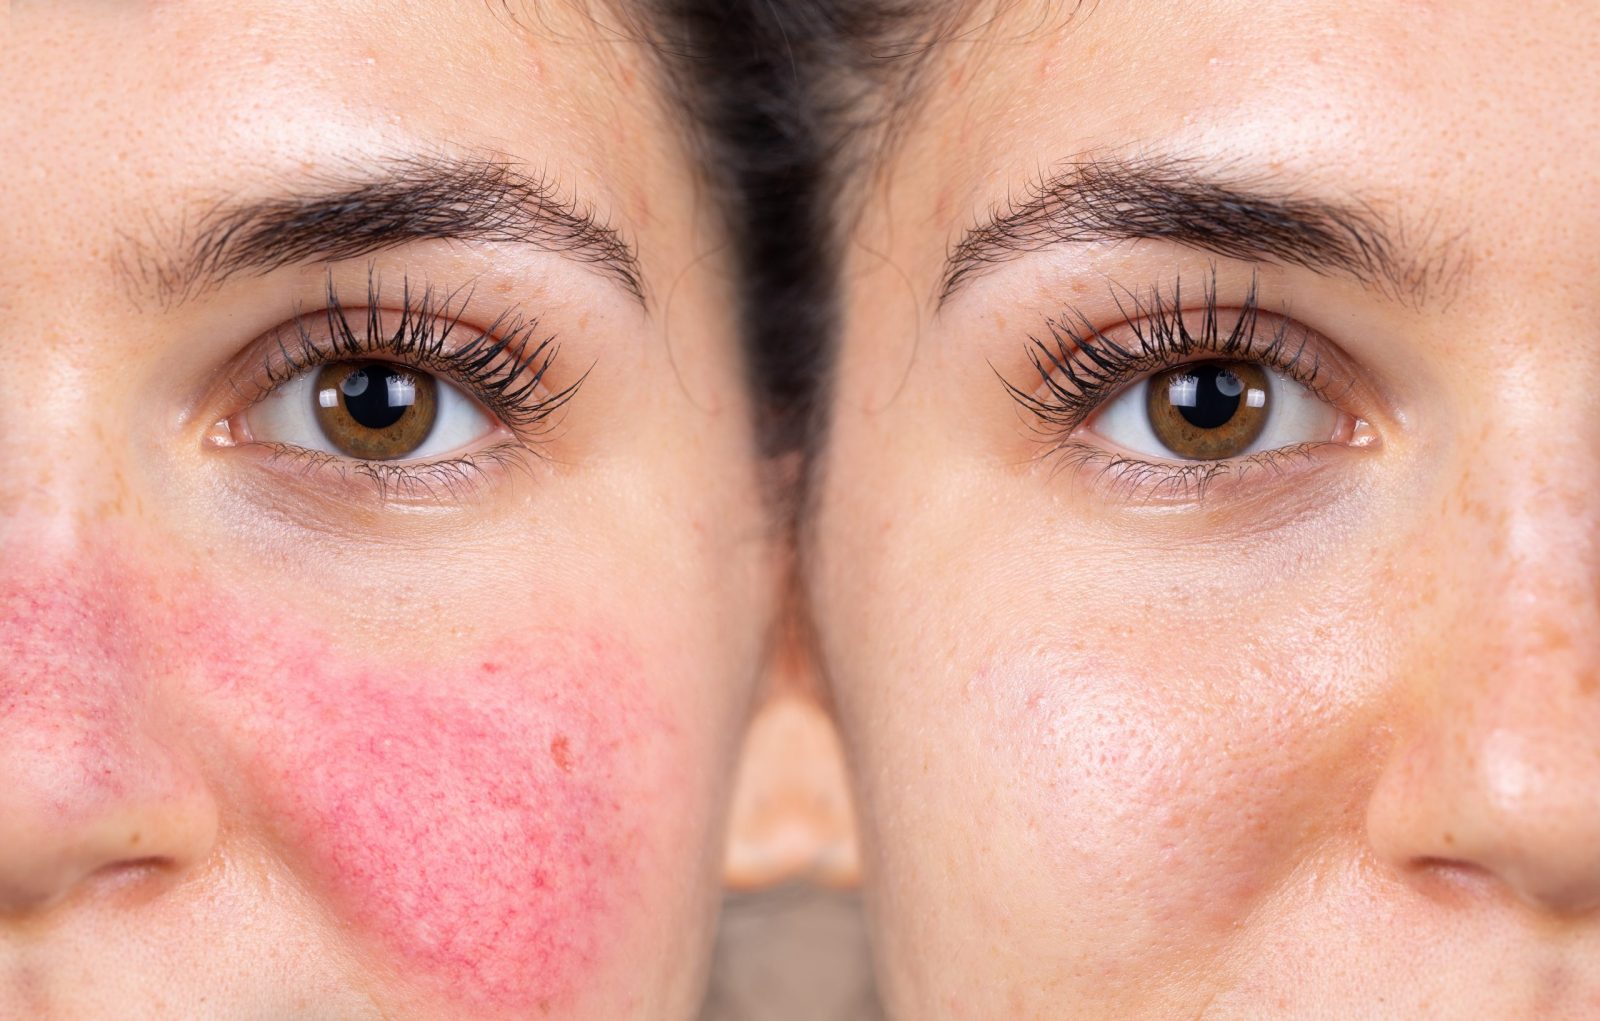 HOW TO COPE WITH ROSACEA